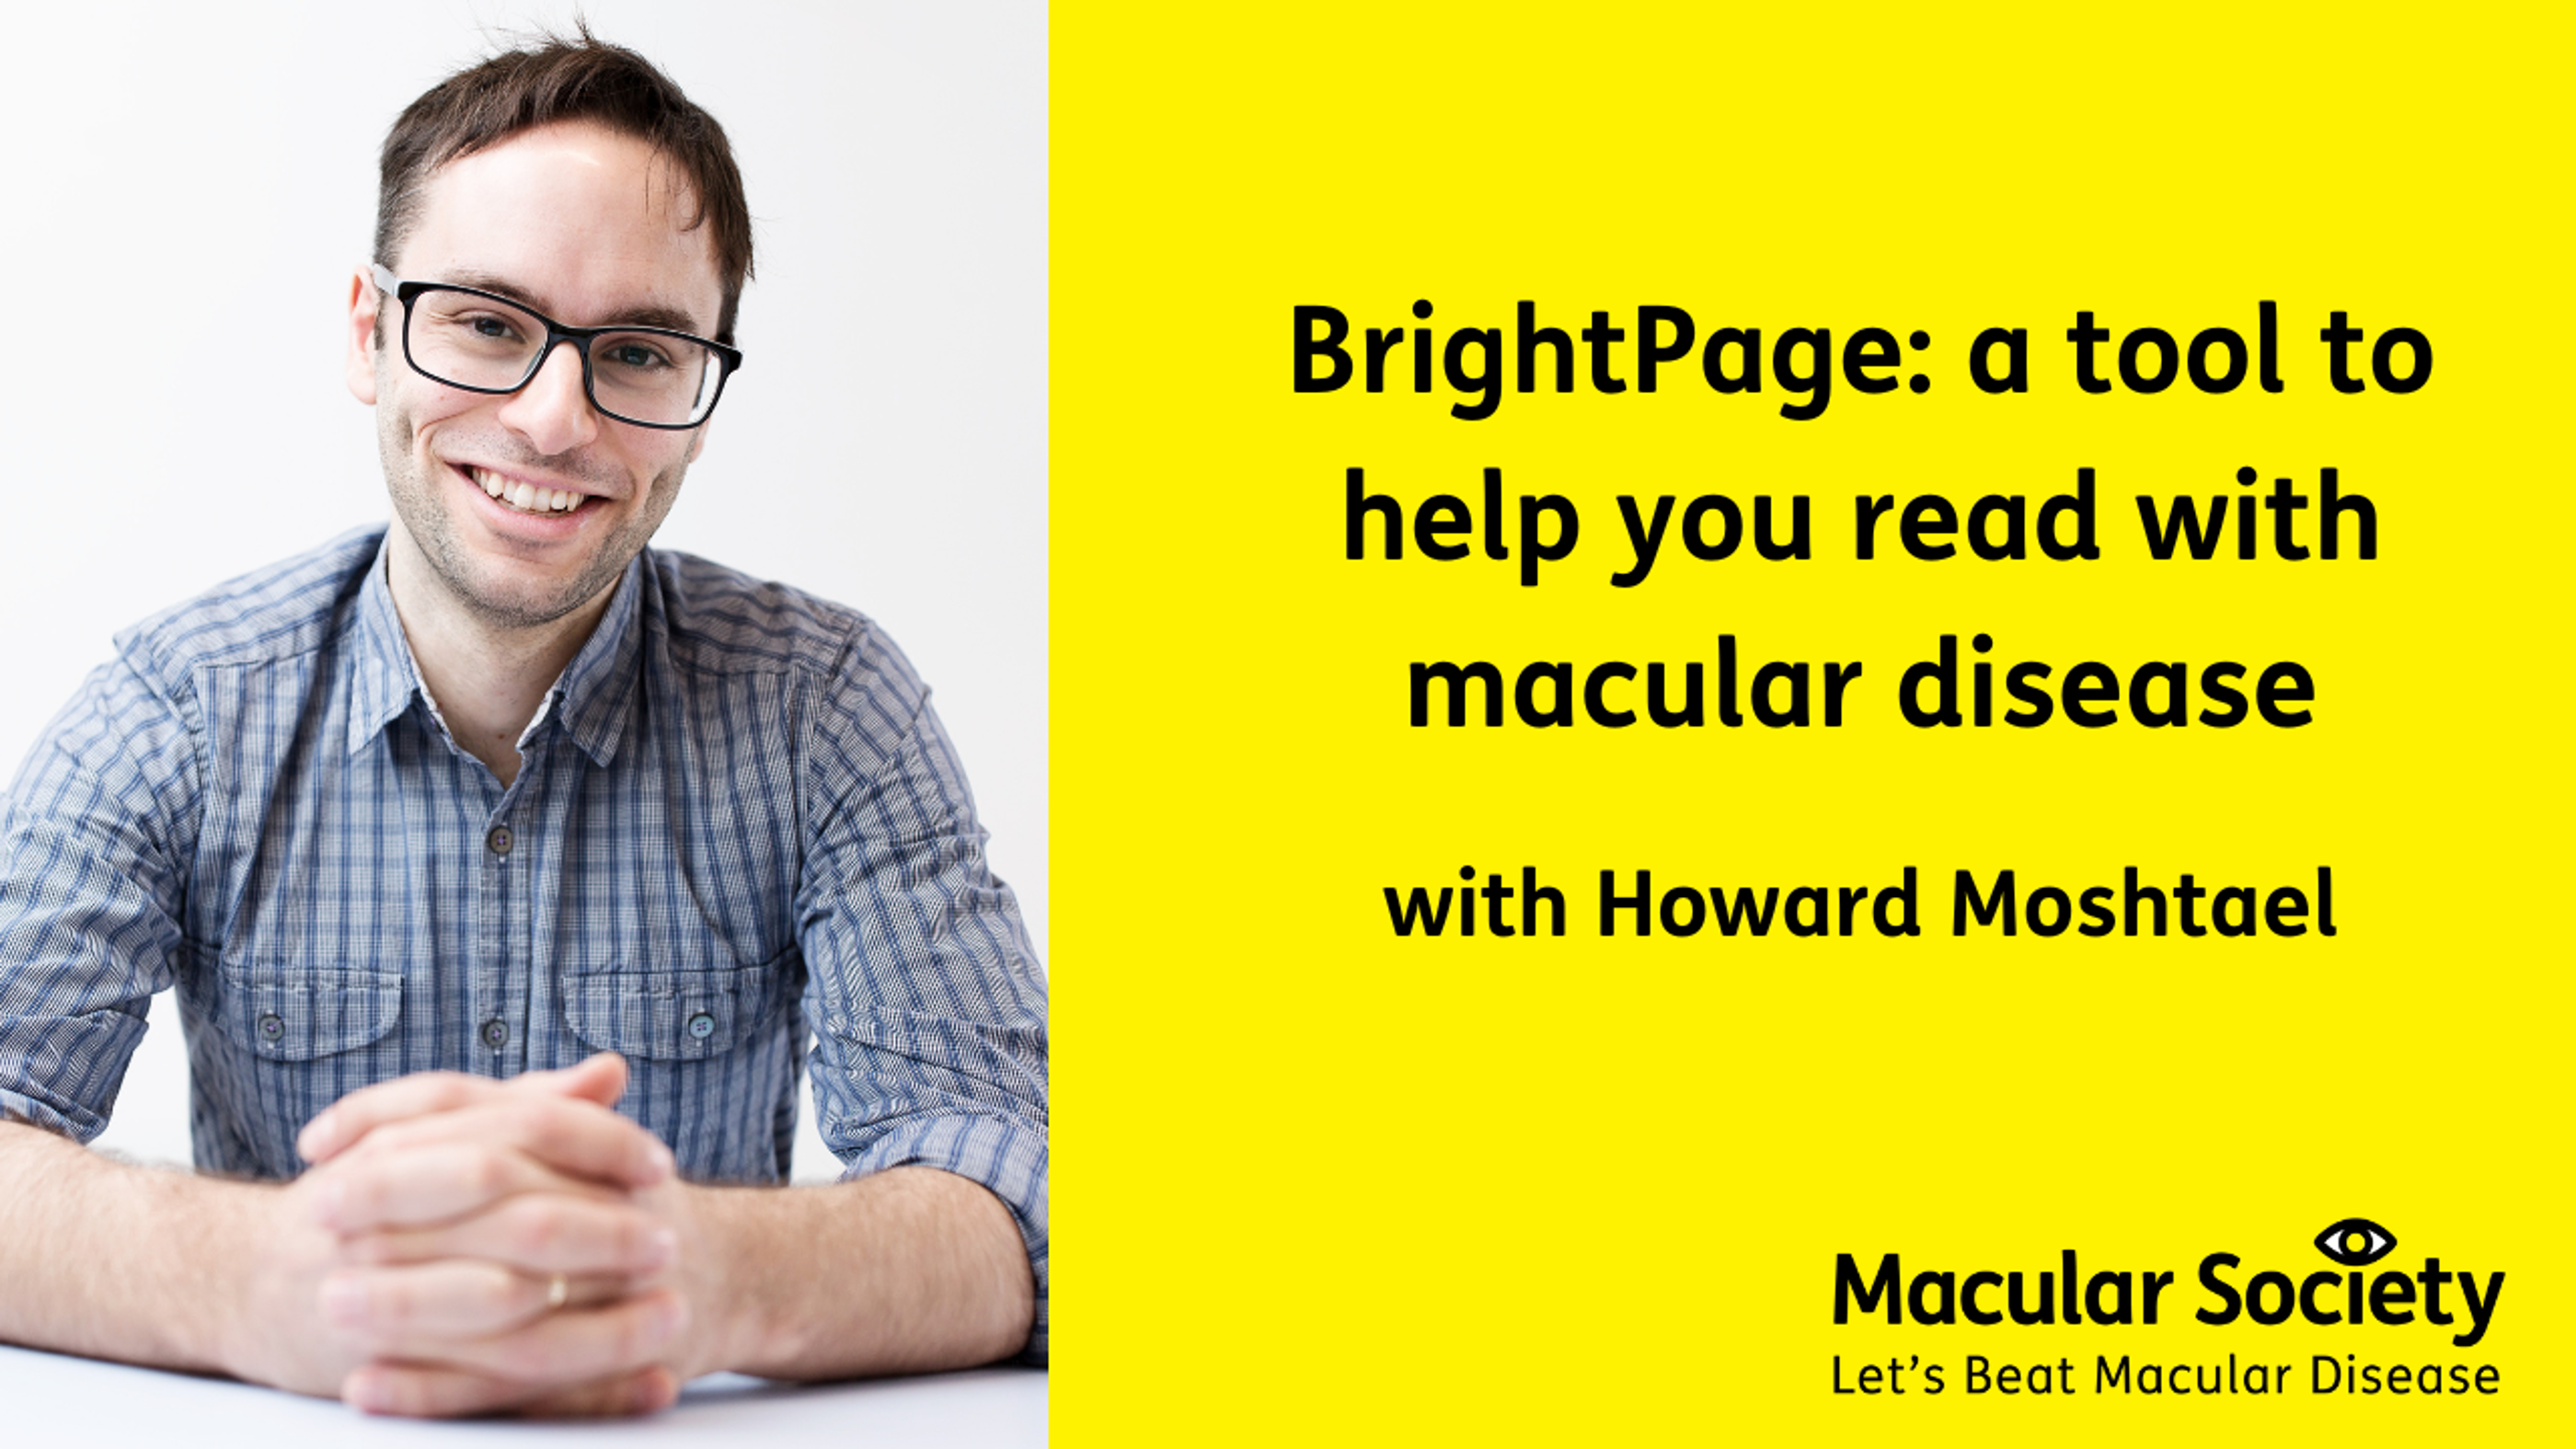 BrightPage: a tool to help you read with macular disease